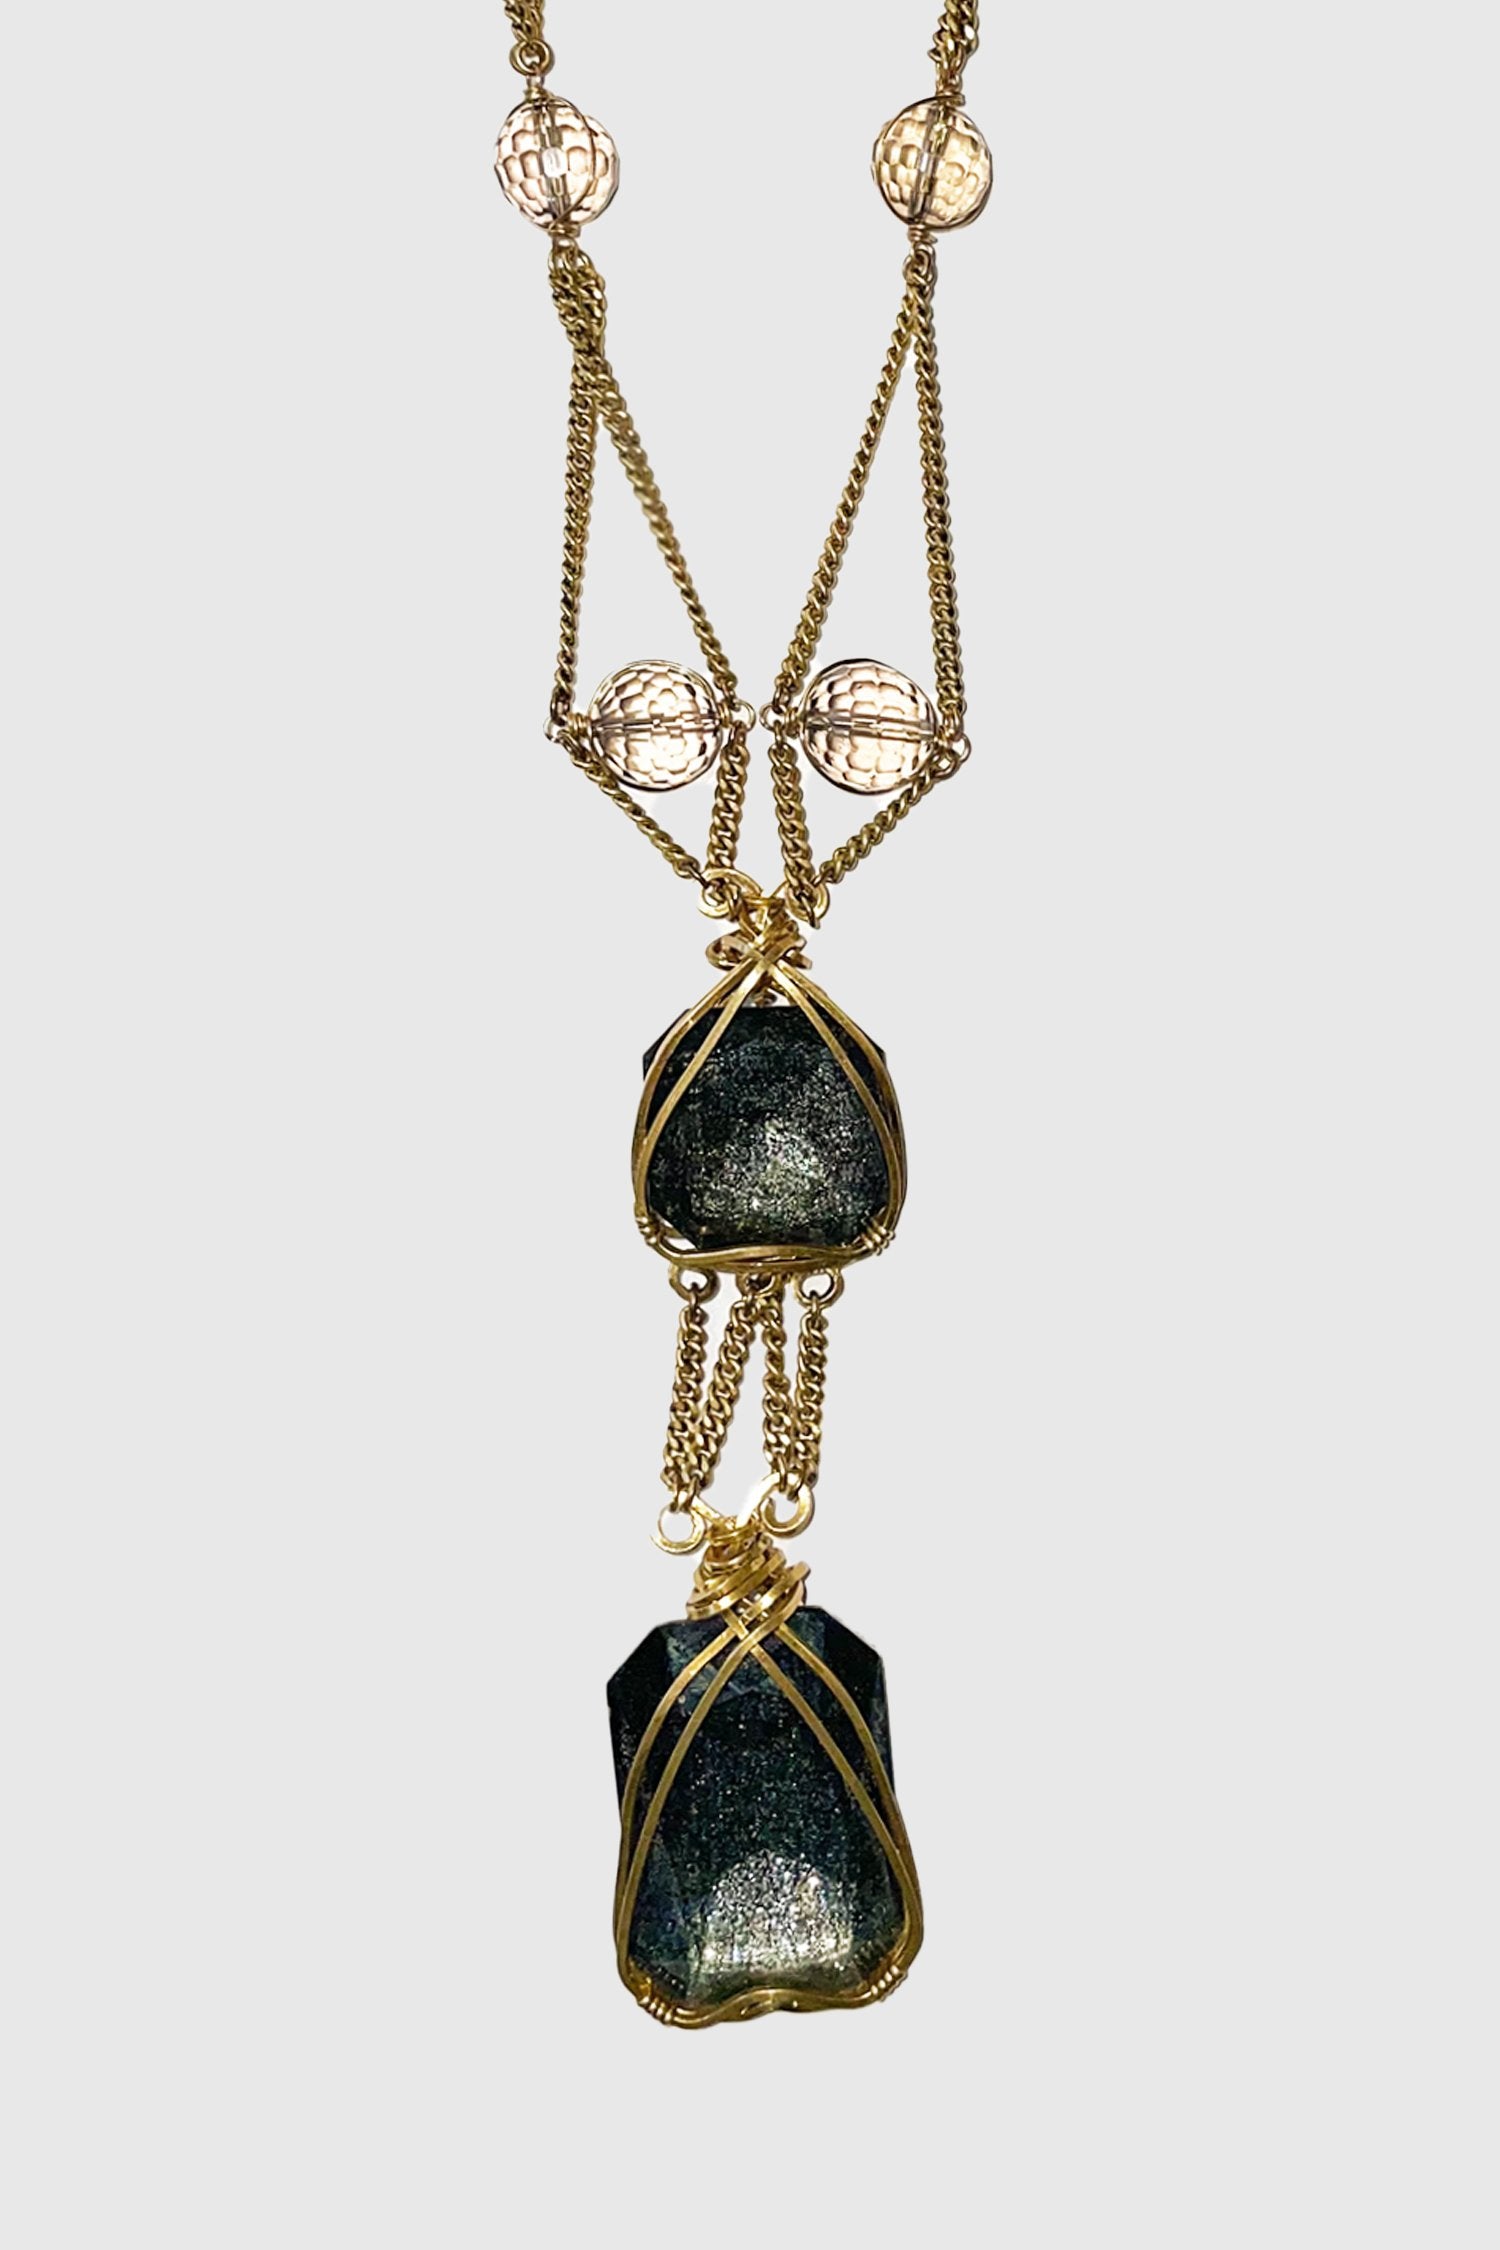 Beamon Crystal Necklace, 2-chains making a triangle with attach beads, 2-dark green crystal under